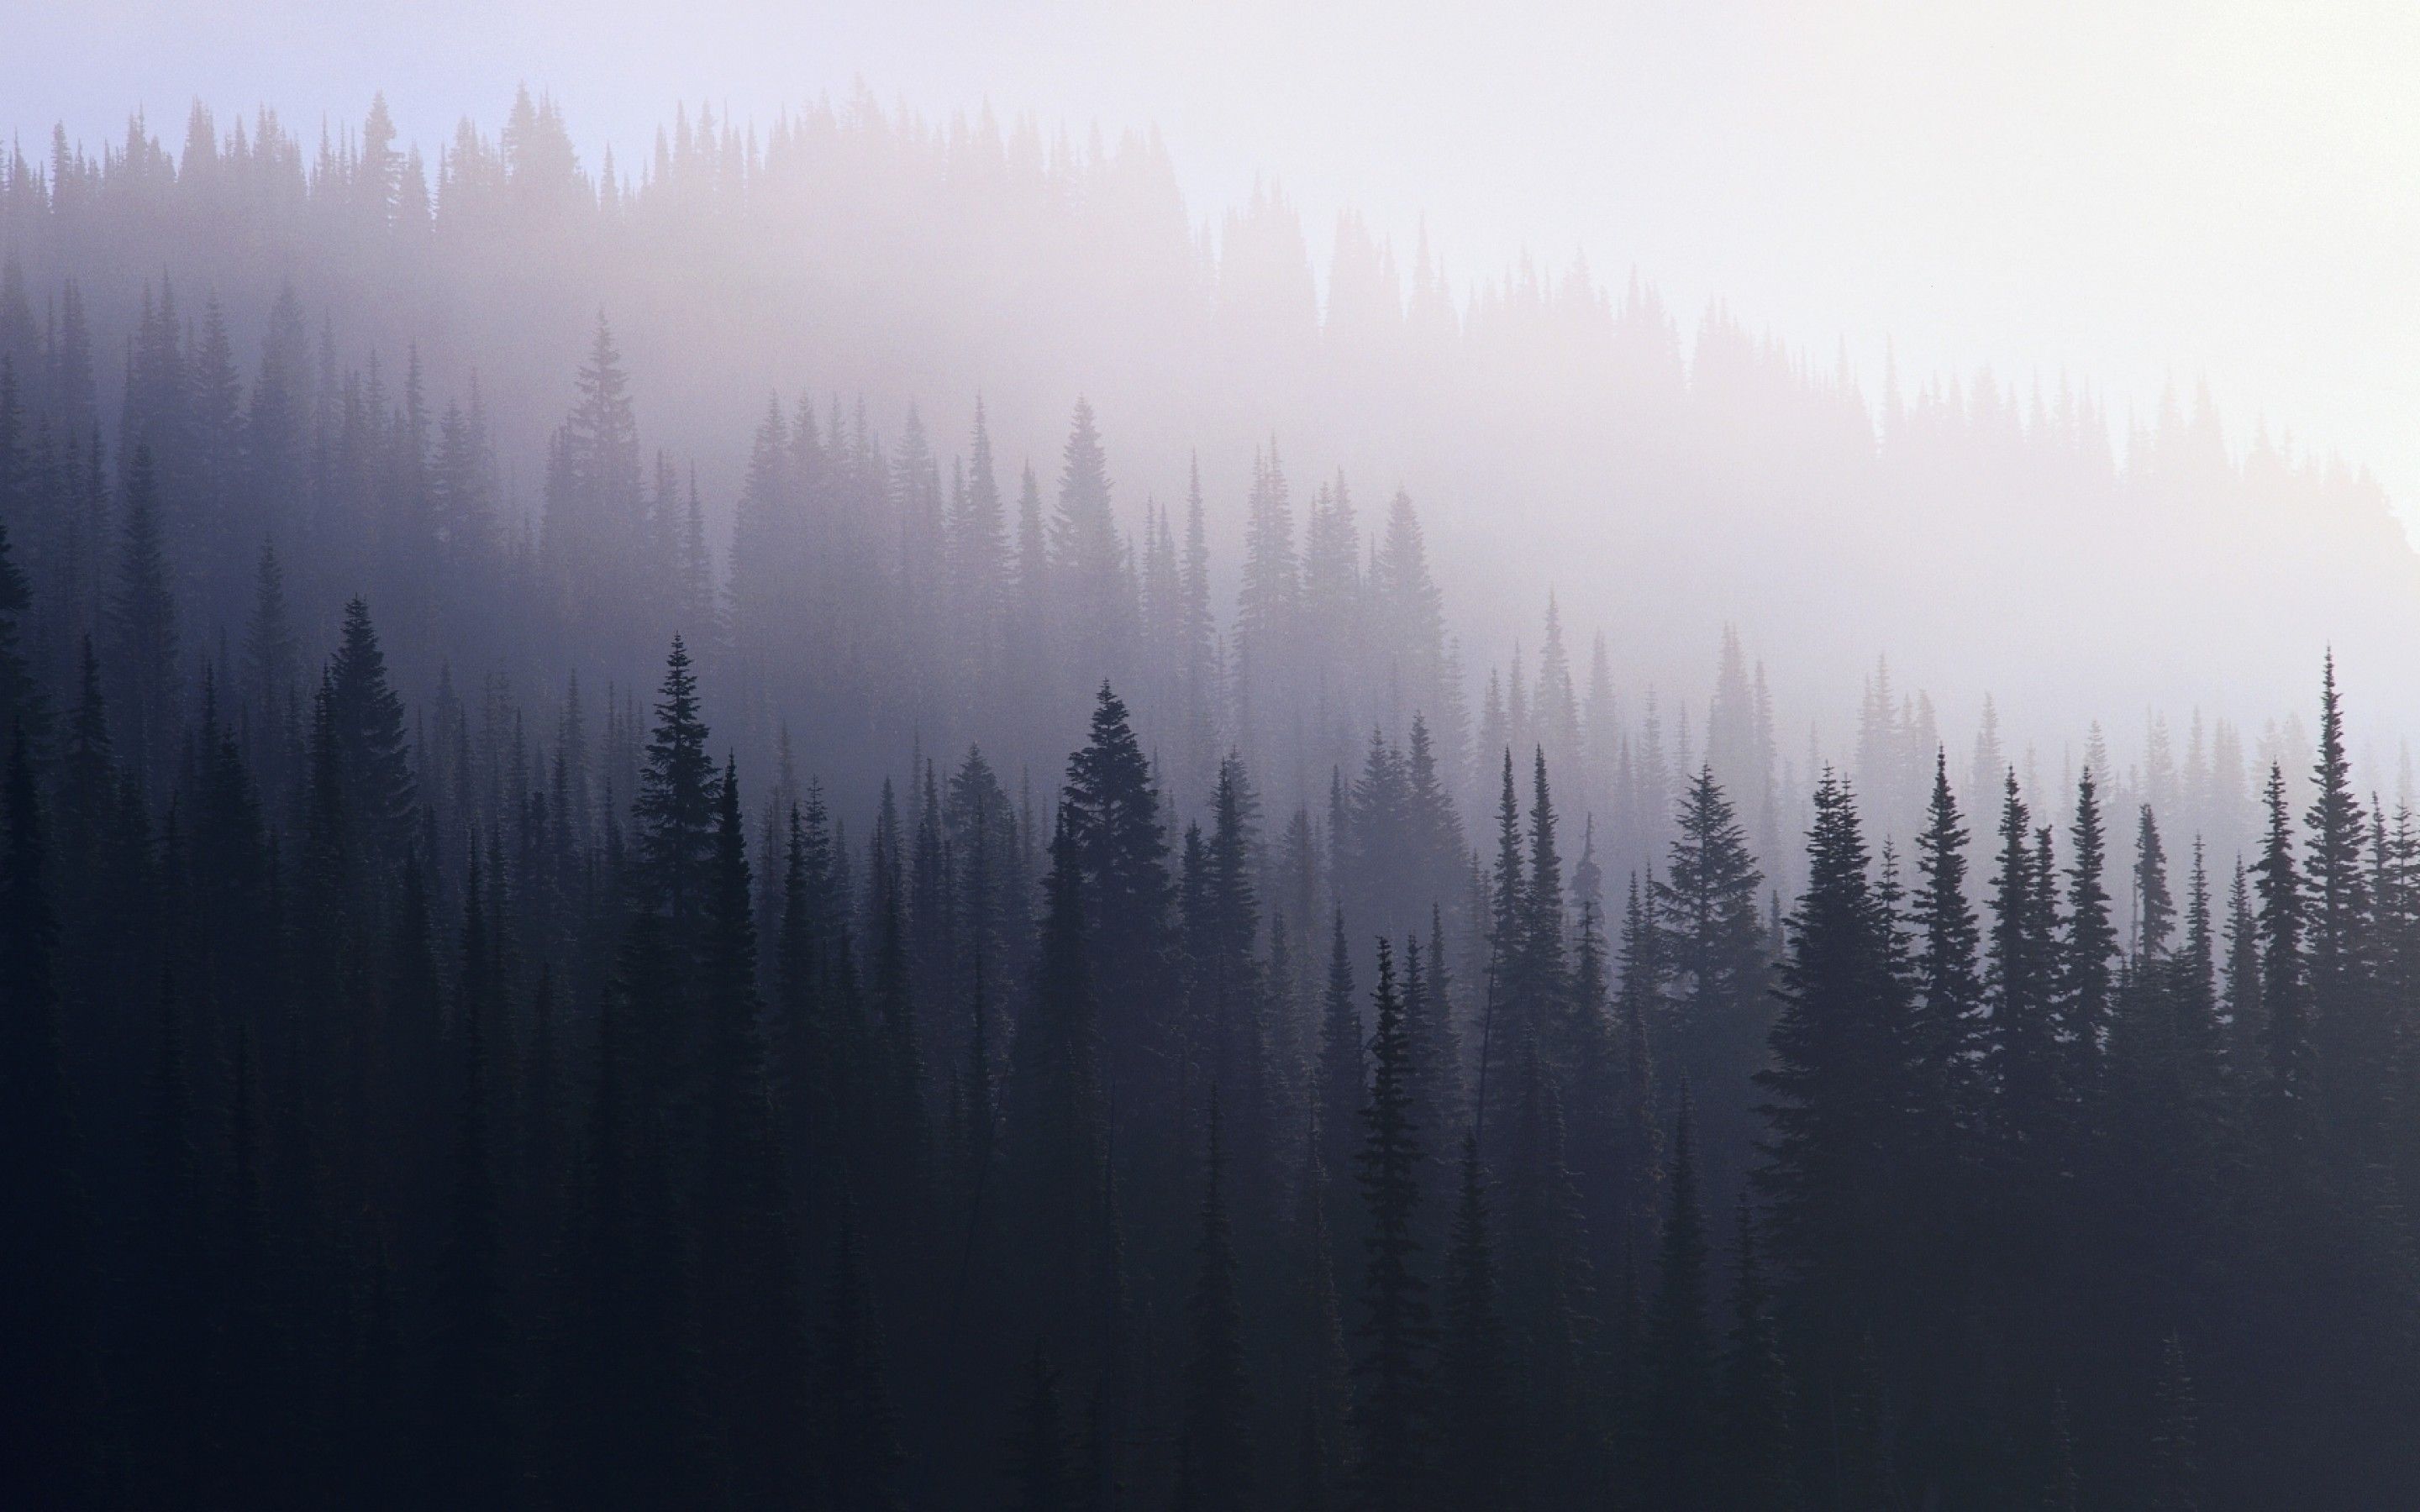 A foggy forest of evergreen trees in the mountains. - Foggy forest